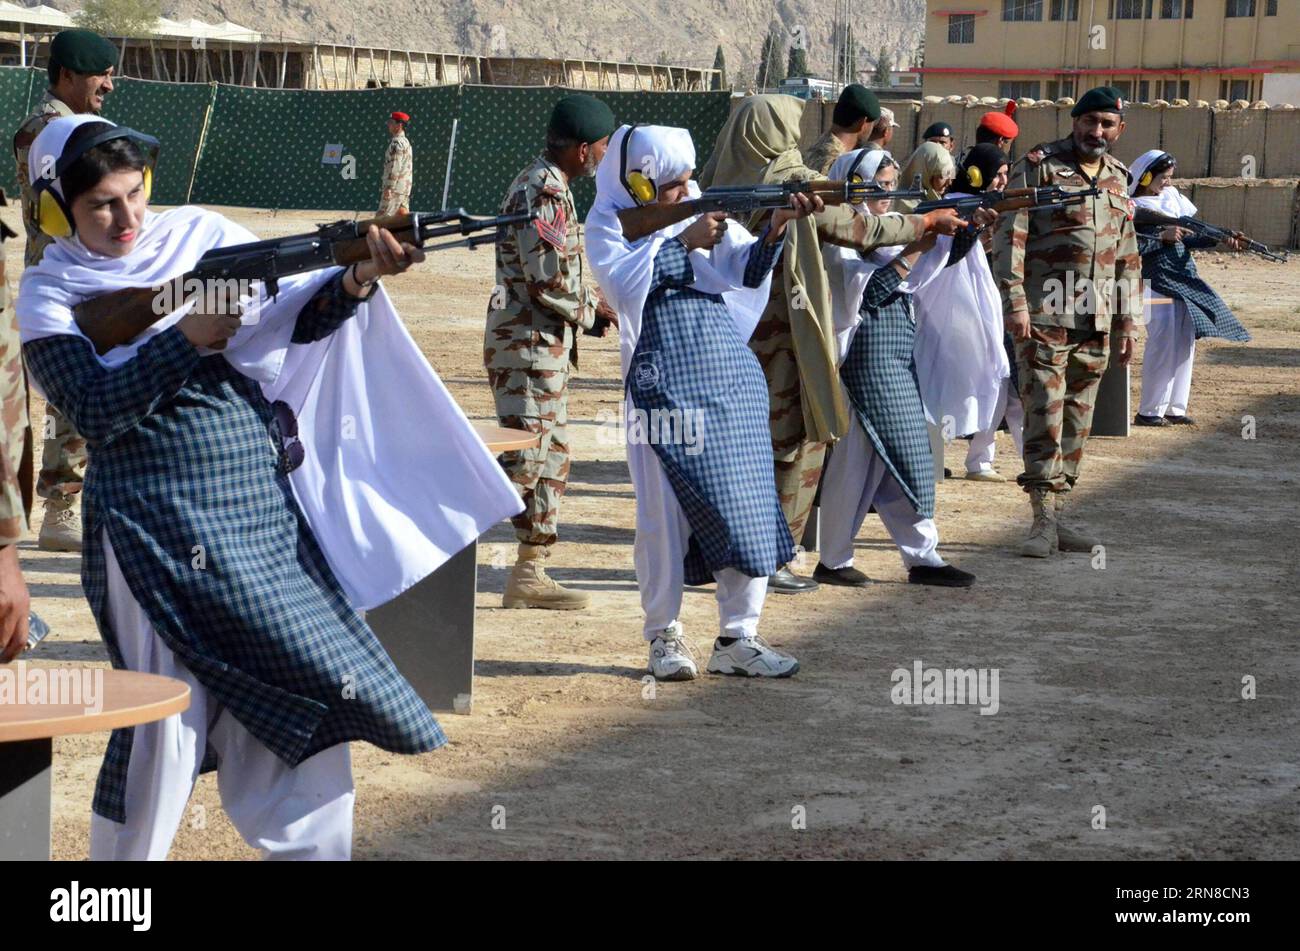 (151017) -- QUETTA, Oct. 17, 2015 -- Female students take part in a weapon training session in southwest Pakistan s Quetta, Oct. 17, 2015. Authorities have commenced special weapon training sessions for female students of Sardar Bahadur Khan Women s University in Quetta. ) PAKISTAN-QUETTA-FEMALE STUDENTS-WEAPON-TRAINING Irfan PUBLICATIONxNOTxINxCHN   Quetta OCT 17 2015 Female Students Take Part in a Weapon Training Session in Southwest Pakistan S Quetta OCT 17 2015 Authorities have commenced Special Weapon Training Sessions for Female Students of Sardar Bahadur Khan Women S University in Quett Stock Photo